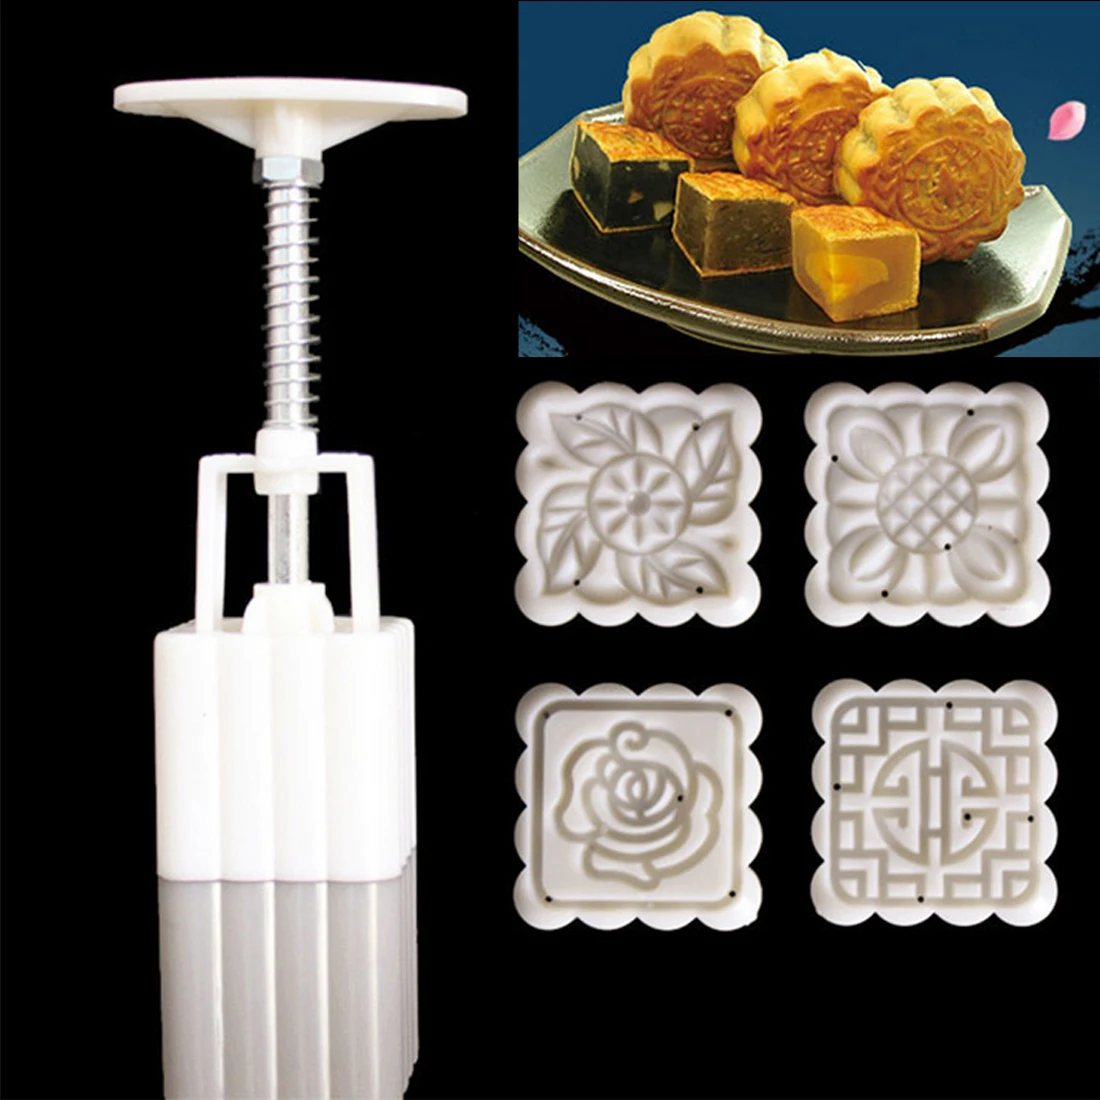 

4pcs/set Chinese Mooncake mold DIY Set Square Moon Cake Molds With 4 Patterns Molds Baking Pastry Tools